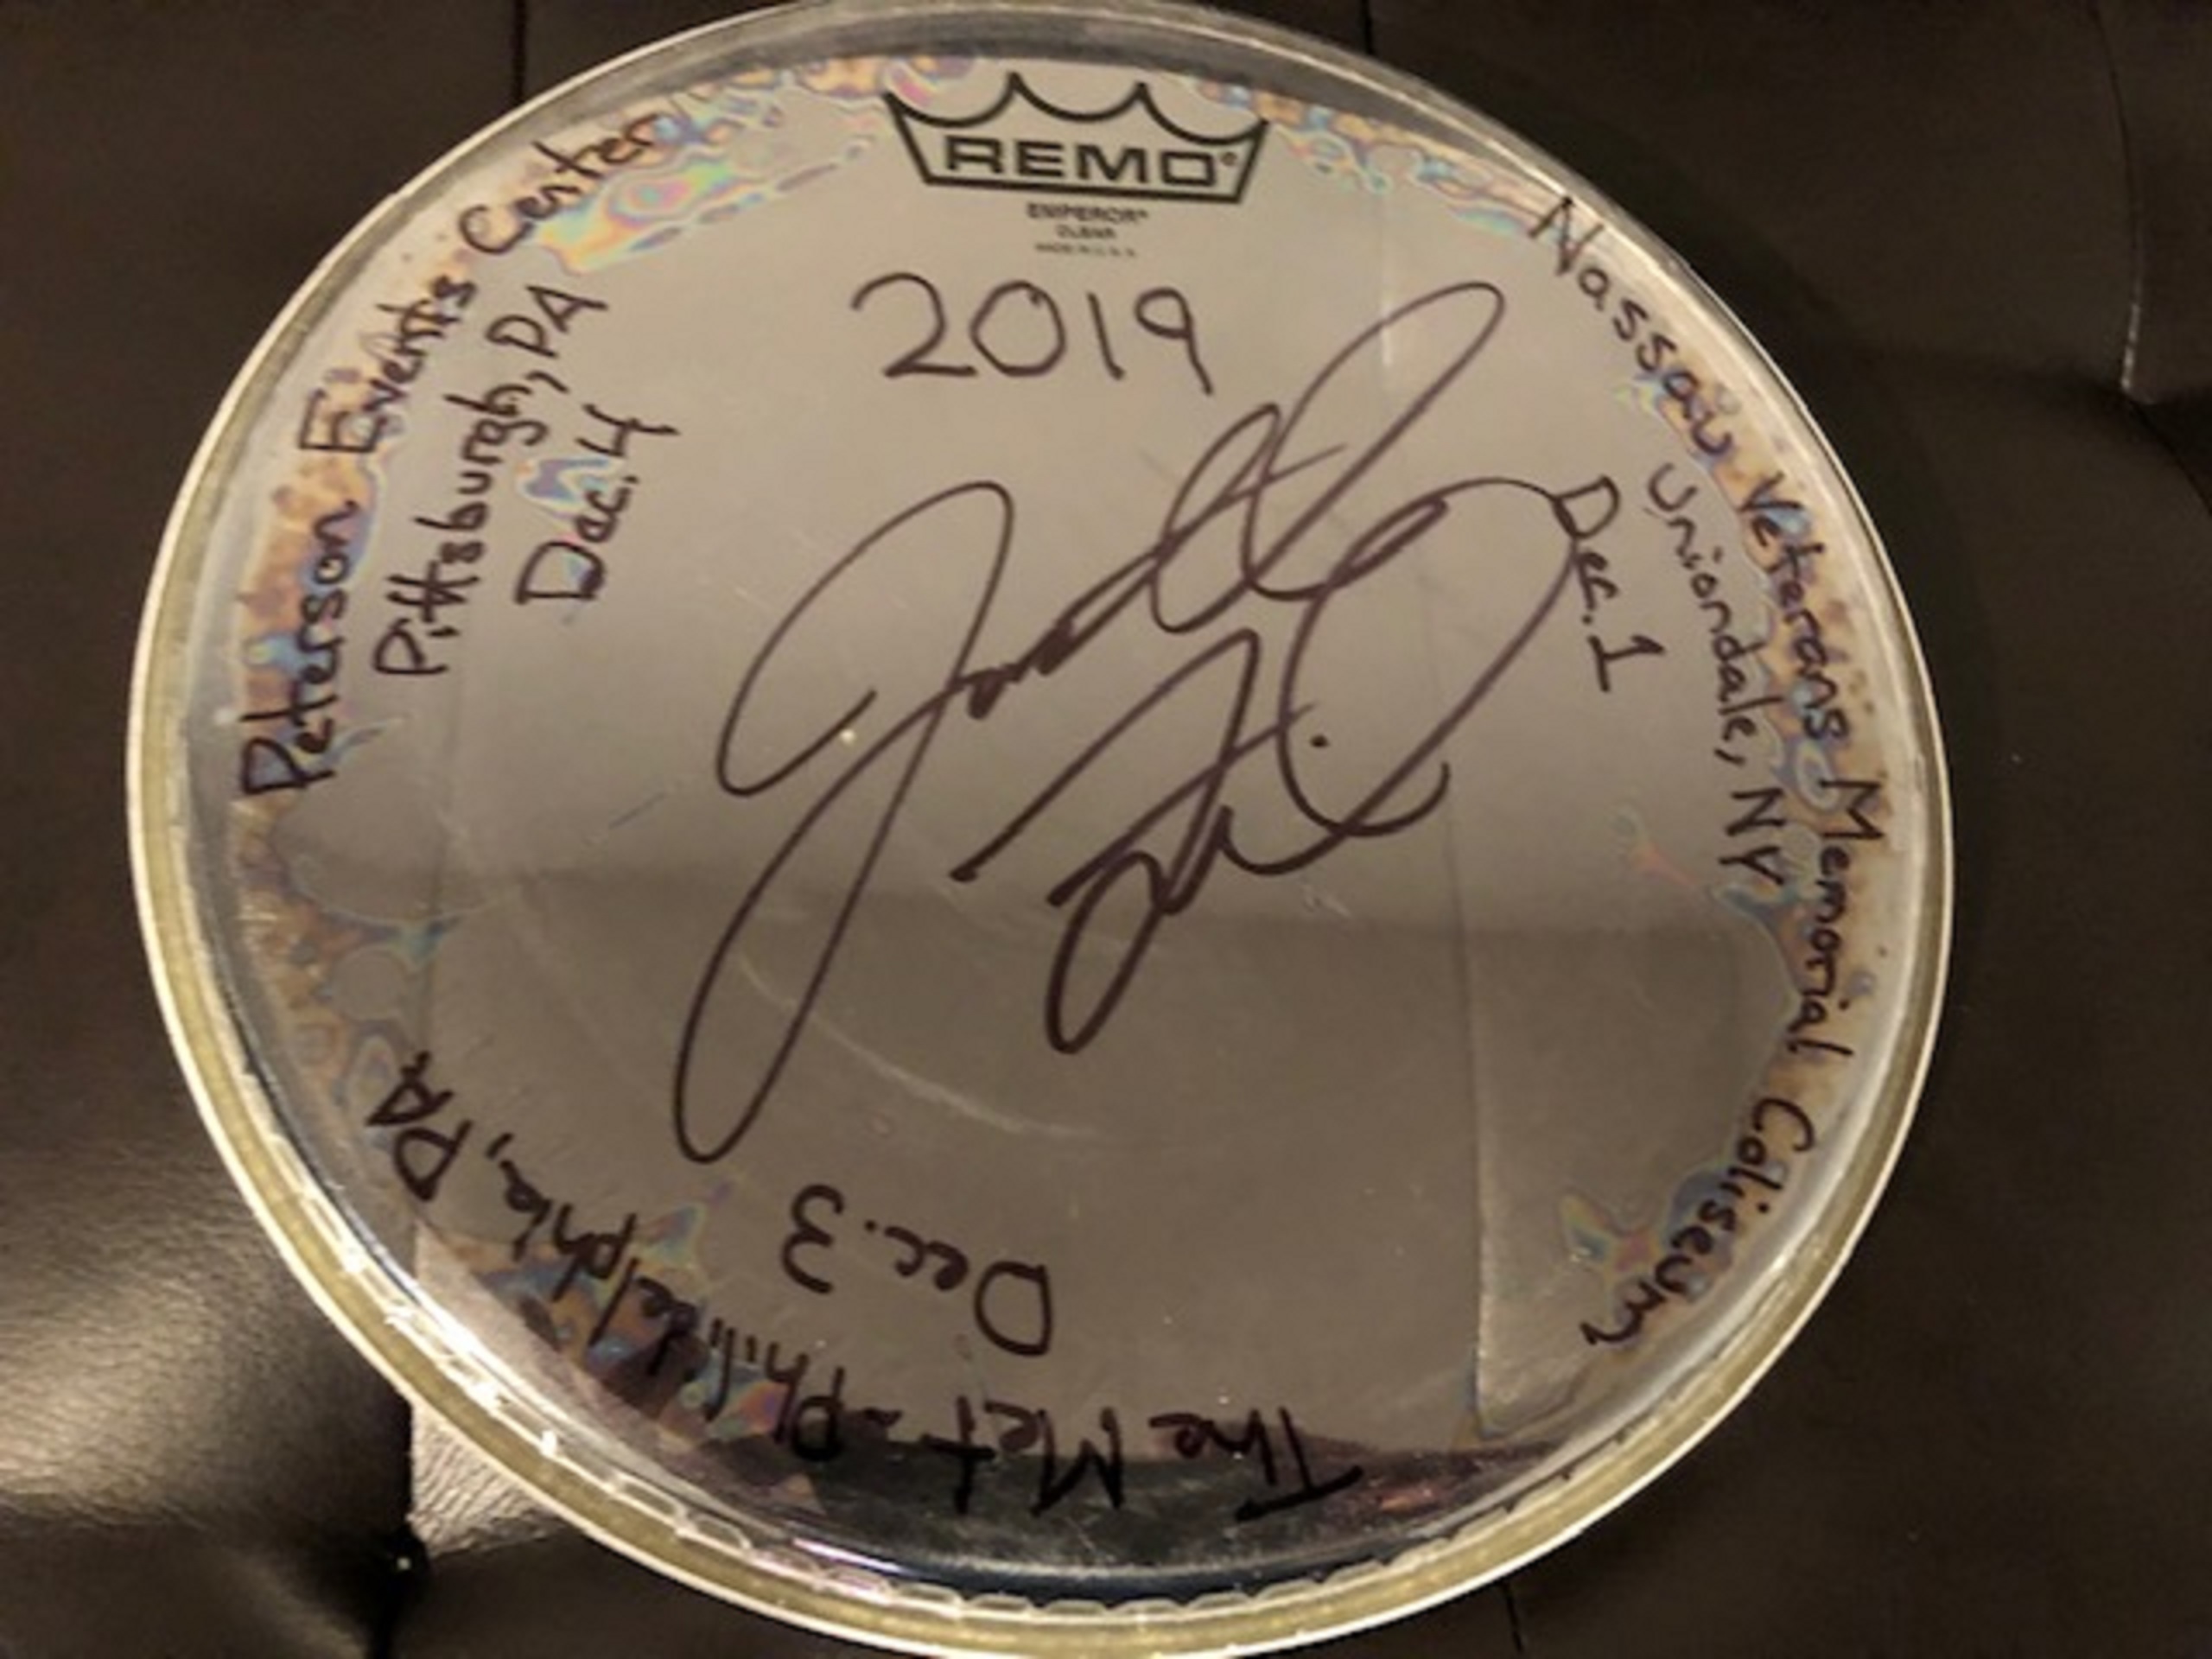 Newest Mimi Fishman Foundation features drum heads used during fall 2019 shows